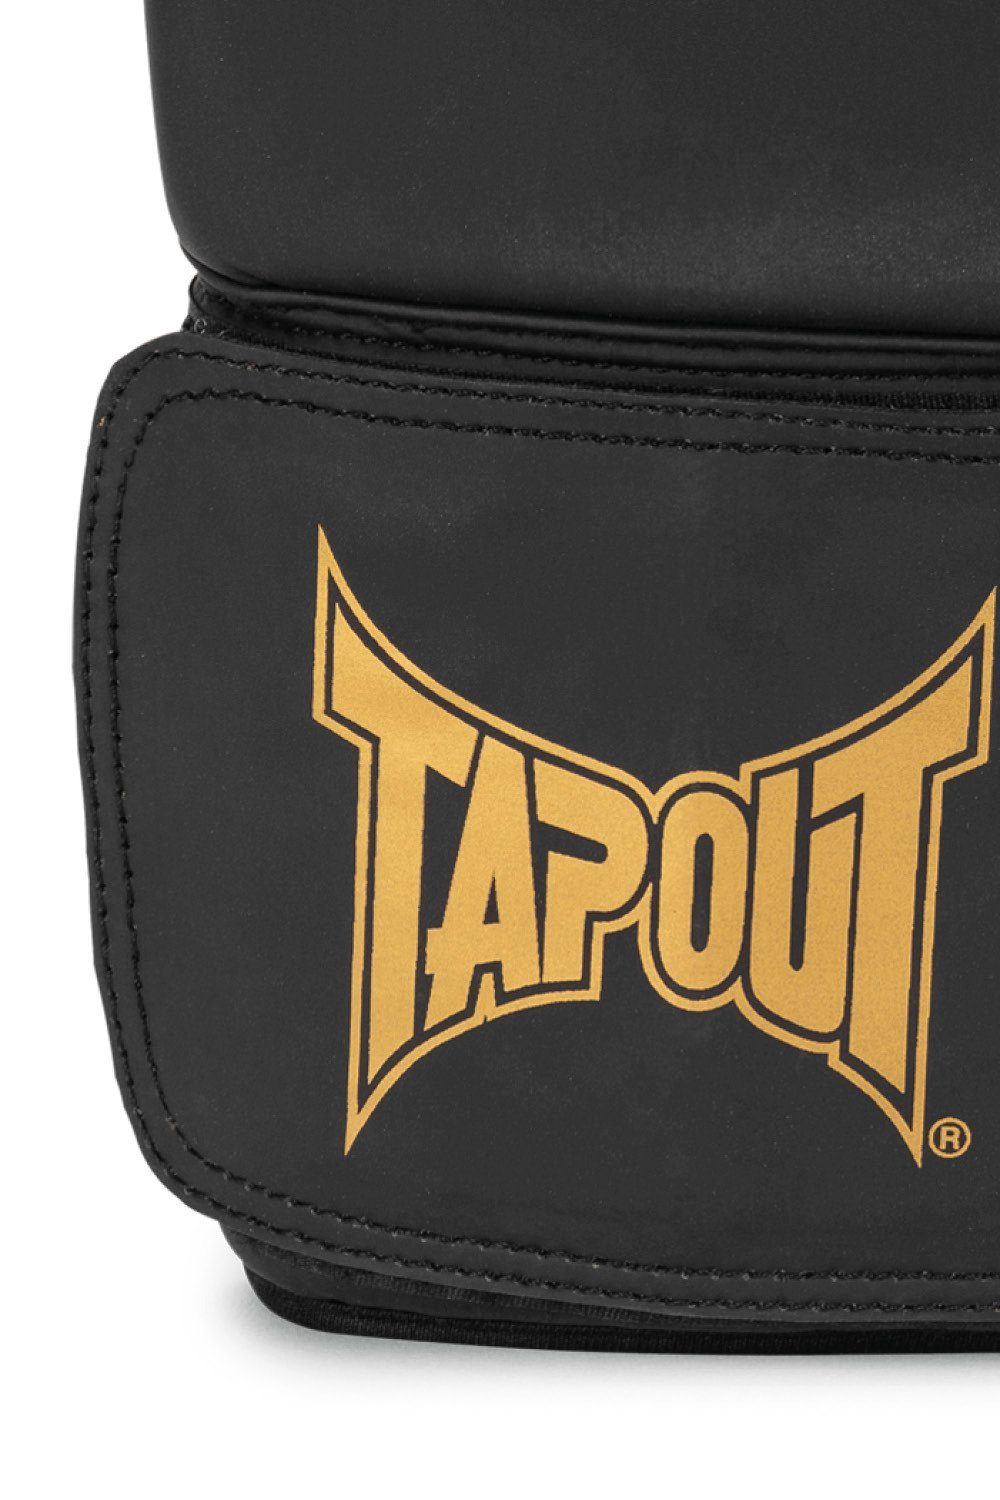 TAPOUT RAGTOWN Boxhandschuhe